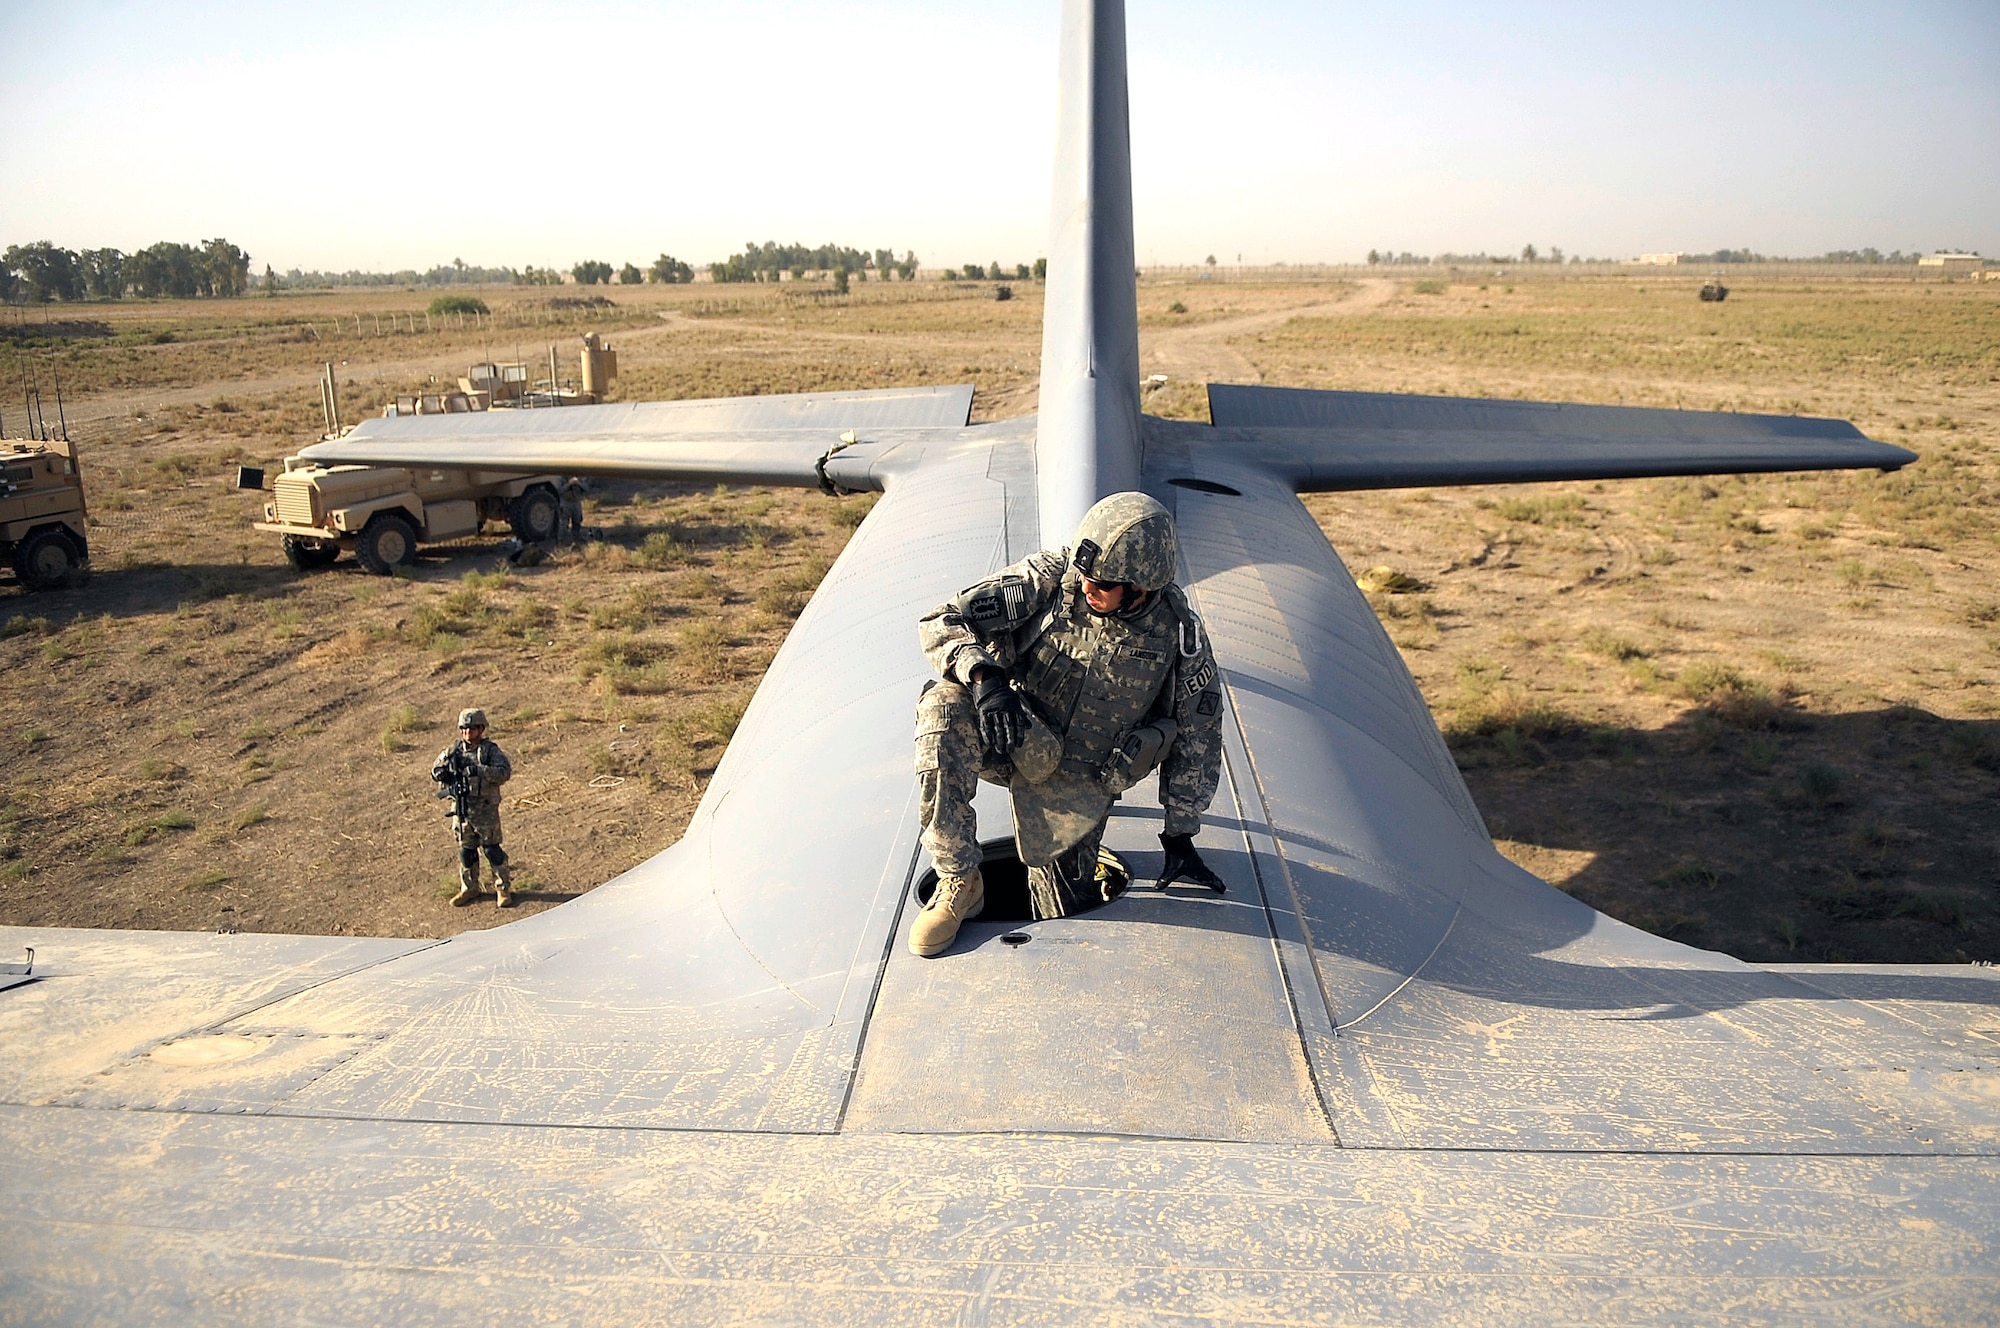 Staff Sgt. Joshua Langdon from the 447th Air Expeditionary Group's Explosive Ordinance Disposal team climbs through the top hatch of a C-130 Hercules aircraft before placing explosive charges around the wings of the plane in Baghdad, Iraq, July 7. The team is using a series of controlled detonations designed to divide the airplane into smaller pieces so it can be moved. The C-130 made an emergency landing in a field north of the Baghdad International Airport shortly after take-off on June 27. (U.S. Air Force photo/Tech. Sgt. Jeffrey Allen)